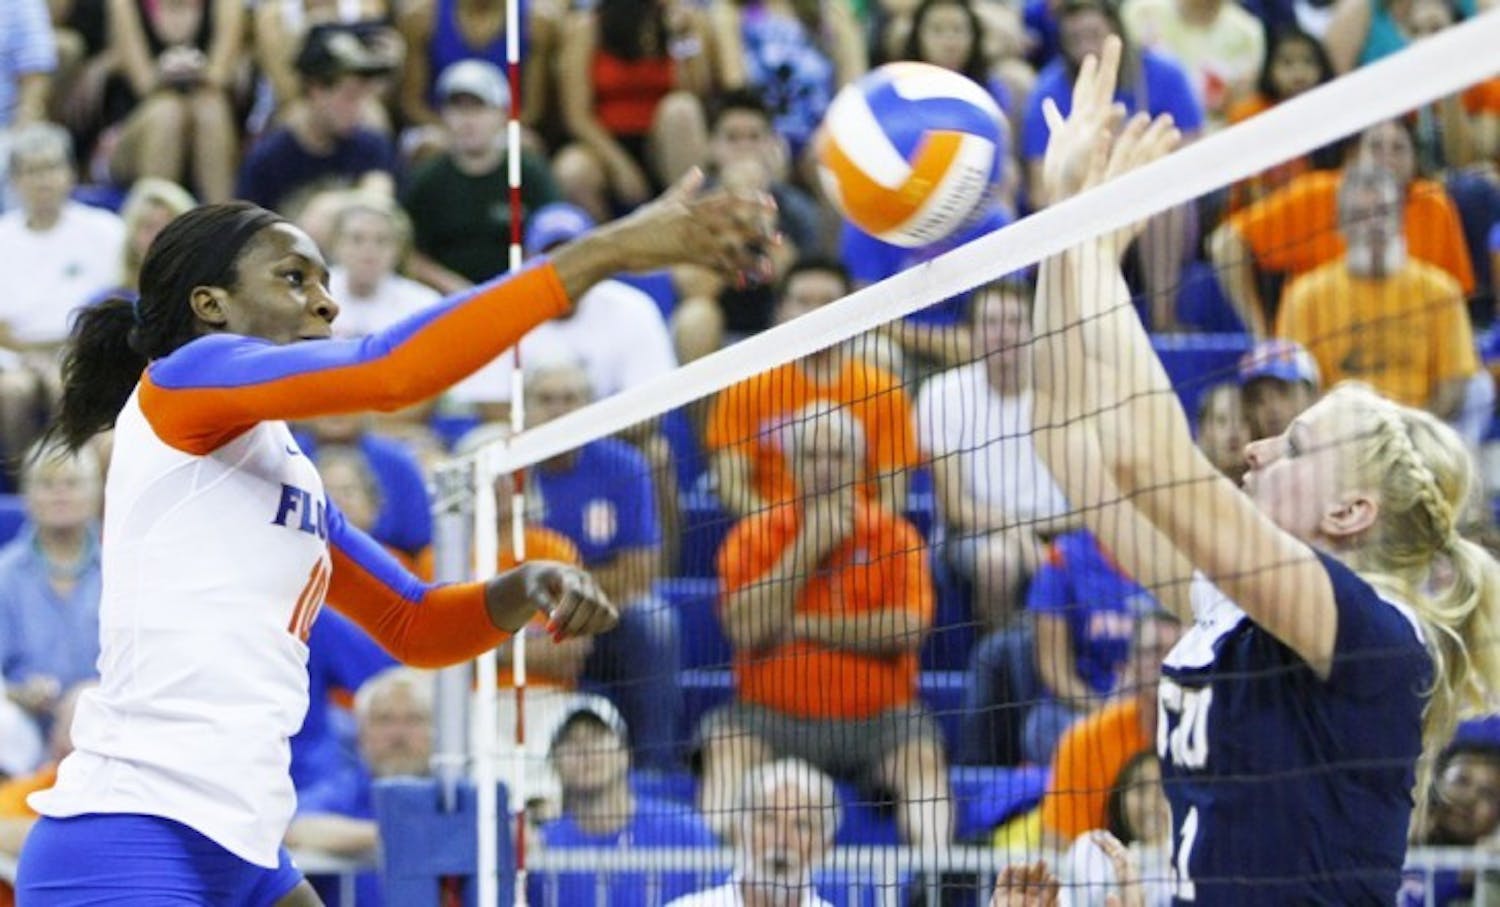 Chloe Mann help the No. 12 Florida Gators defeat the South Carolina Gamecocks on Friday night in Columbia, S.C. She set career highs with 20 kills and 22 points.